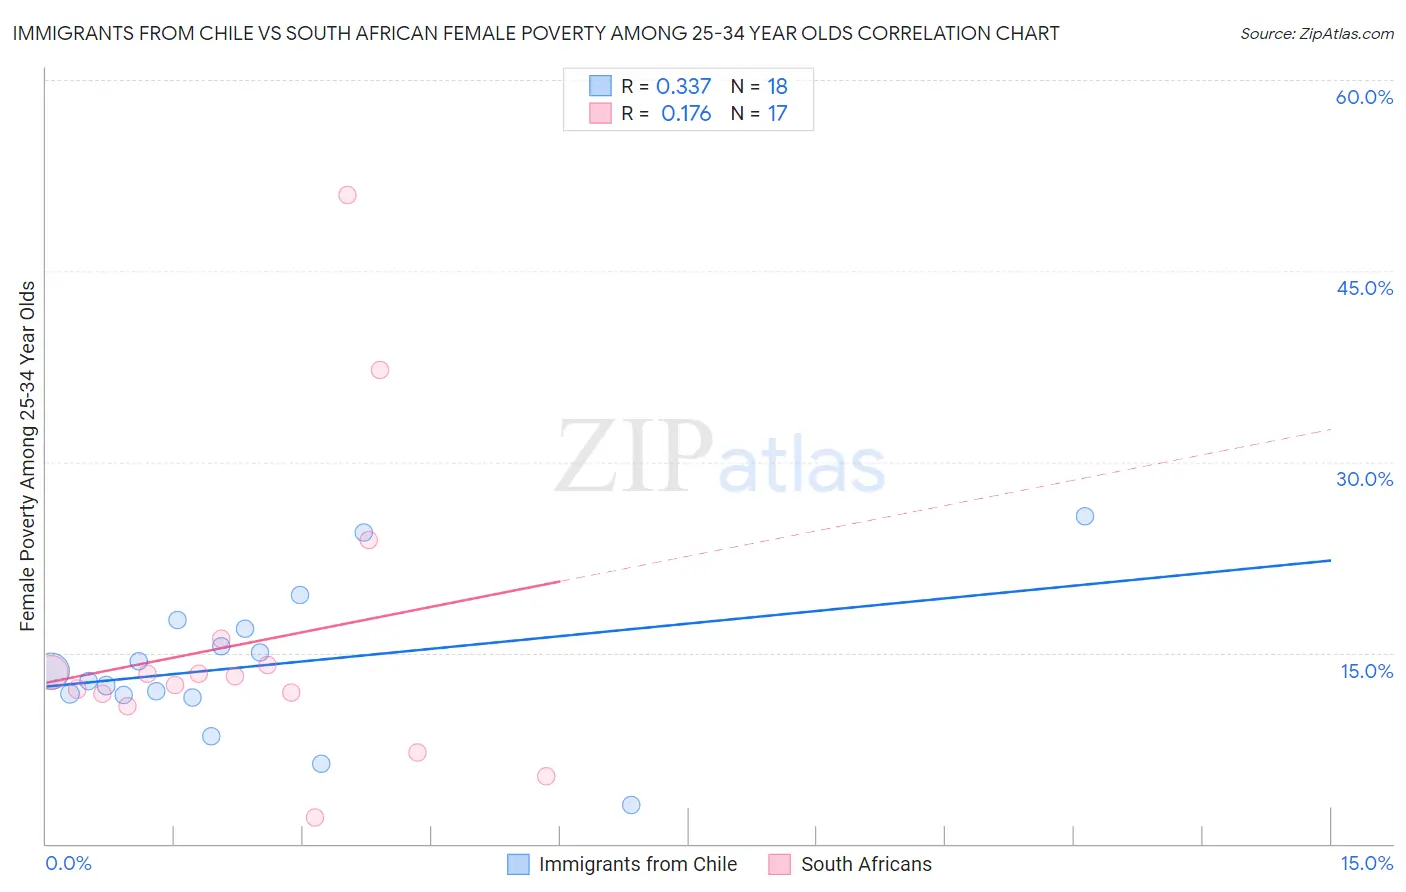 Immigrants from Chile vs South African Female Poverty Among 25-34 Year Olds